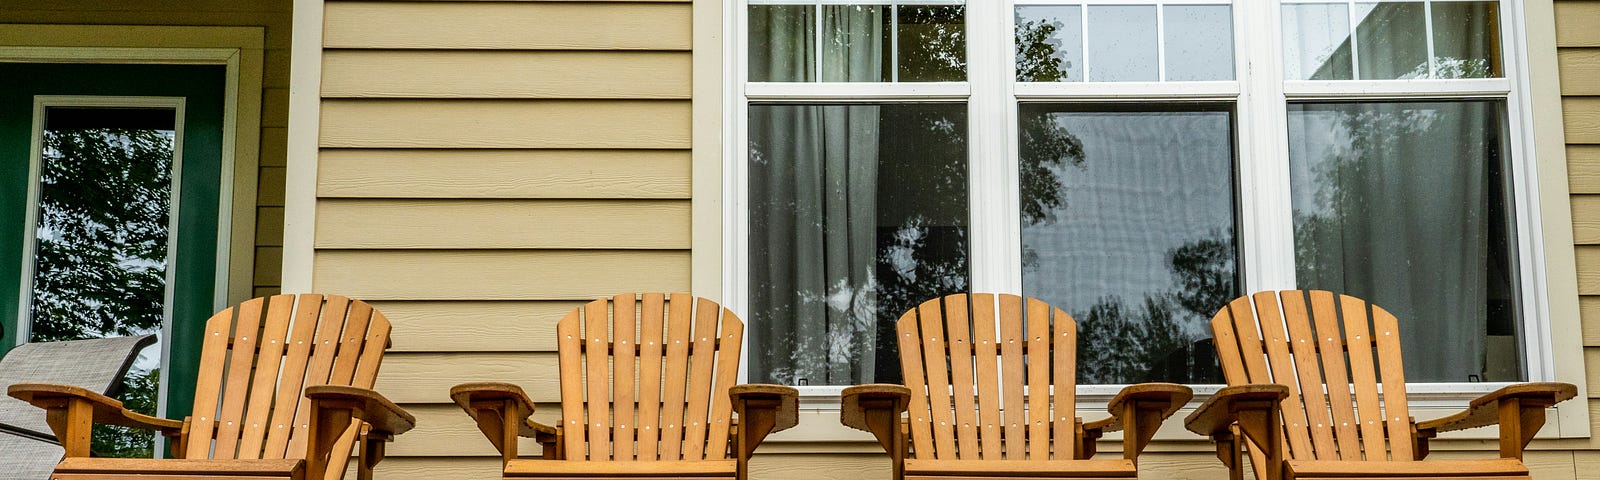 four chairs on a porch